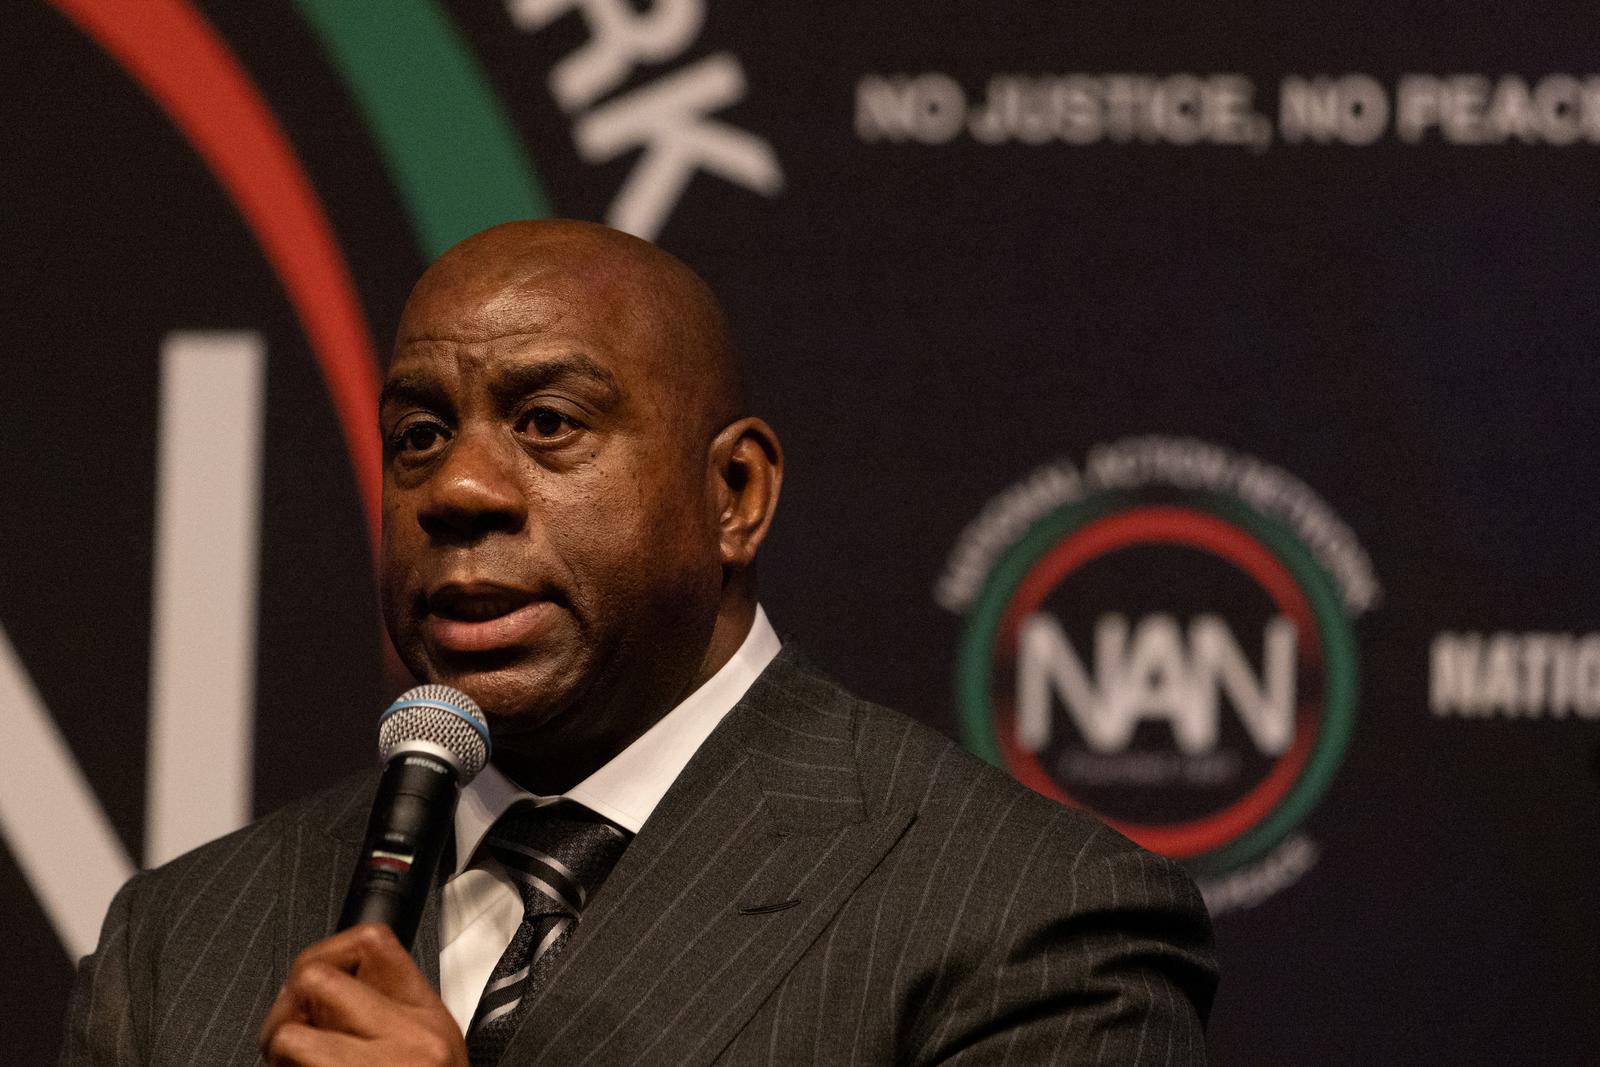 Former NBA basketball player Earvin Magic Johnson speaks during the National Action Network National Convention in New York